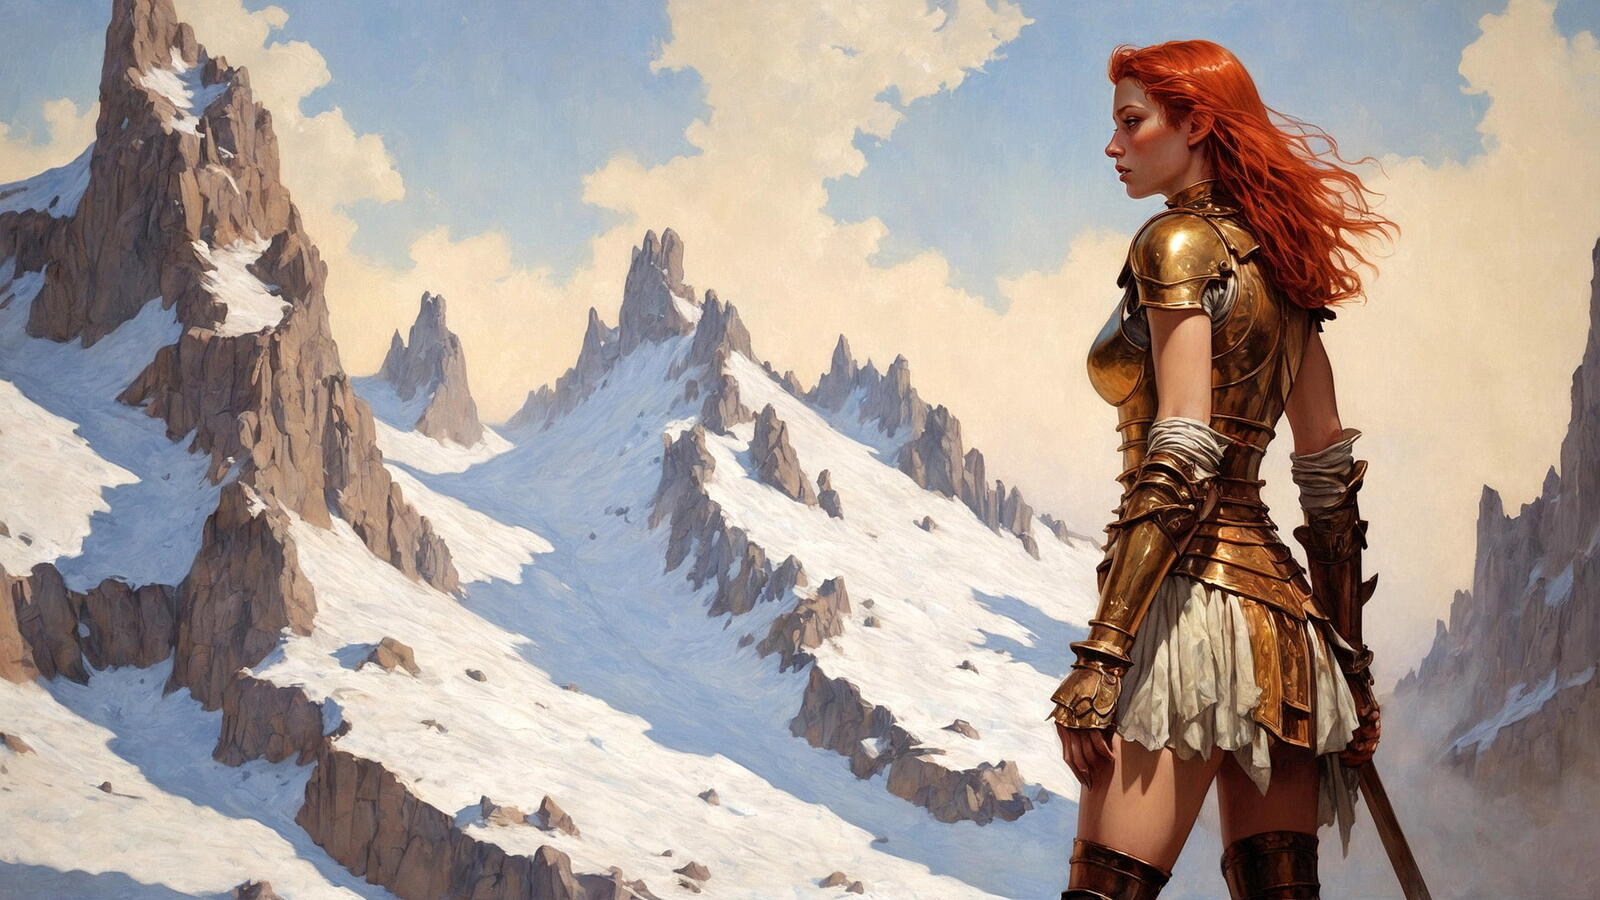 Free photo A red-haired girl in armor stands against a backdrop of snowy mountains